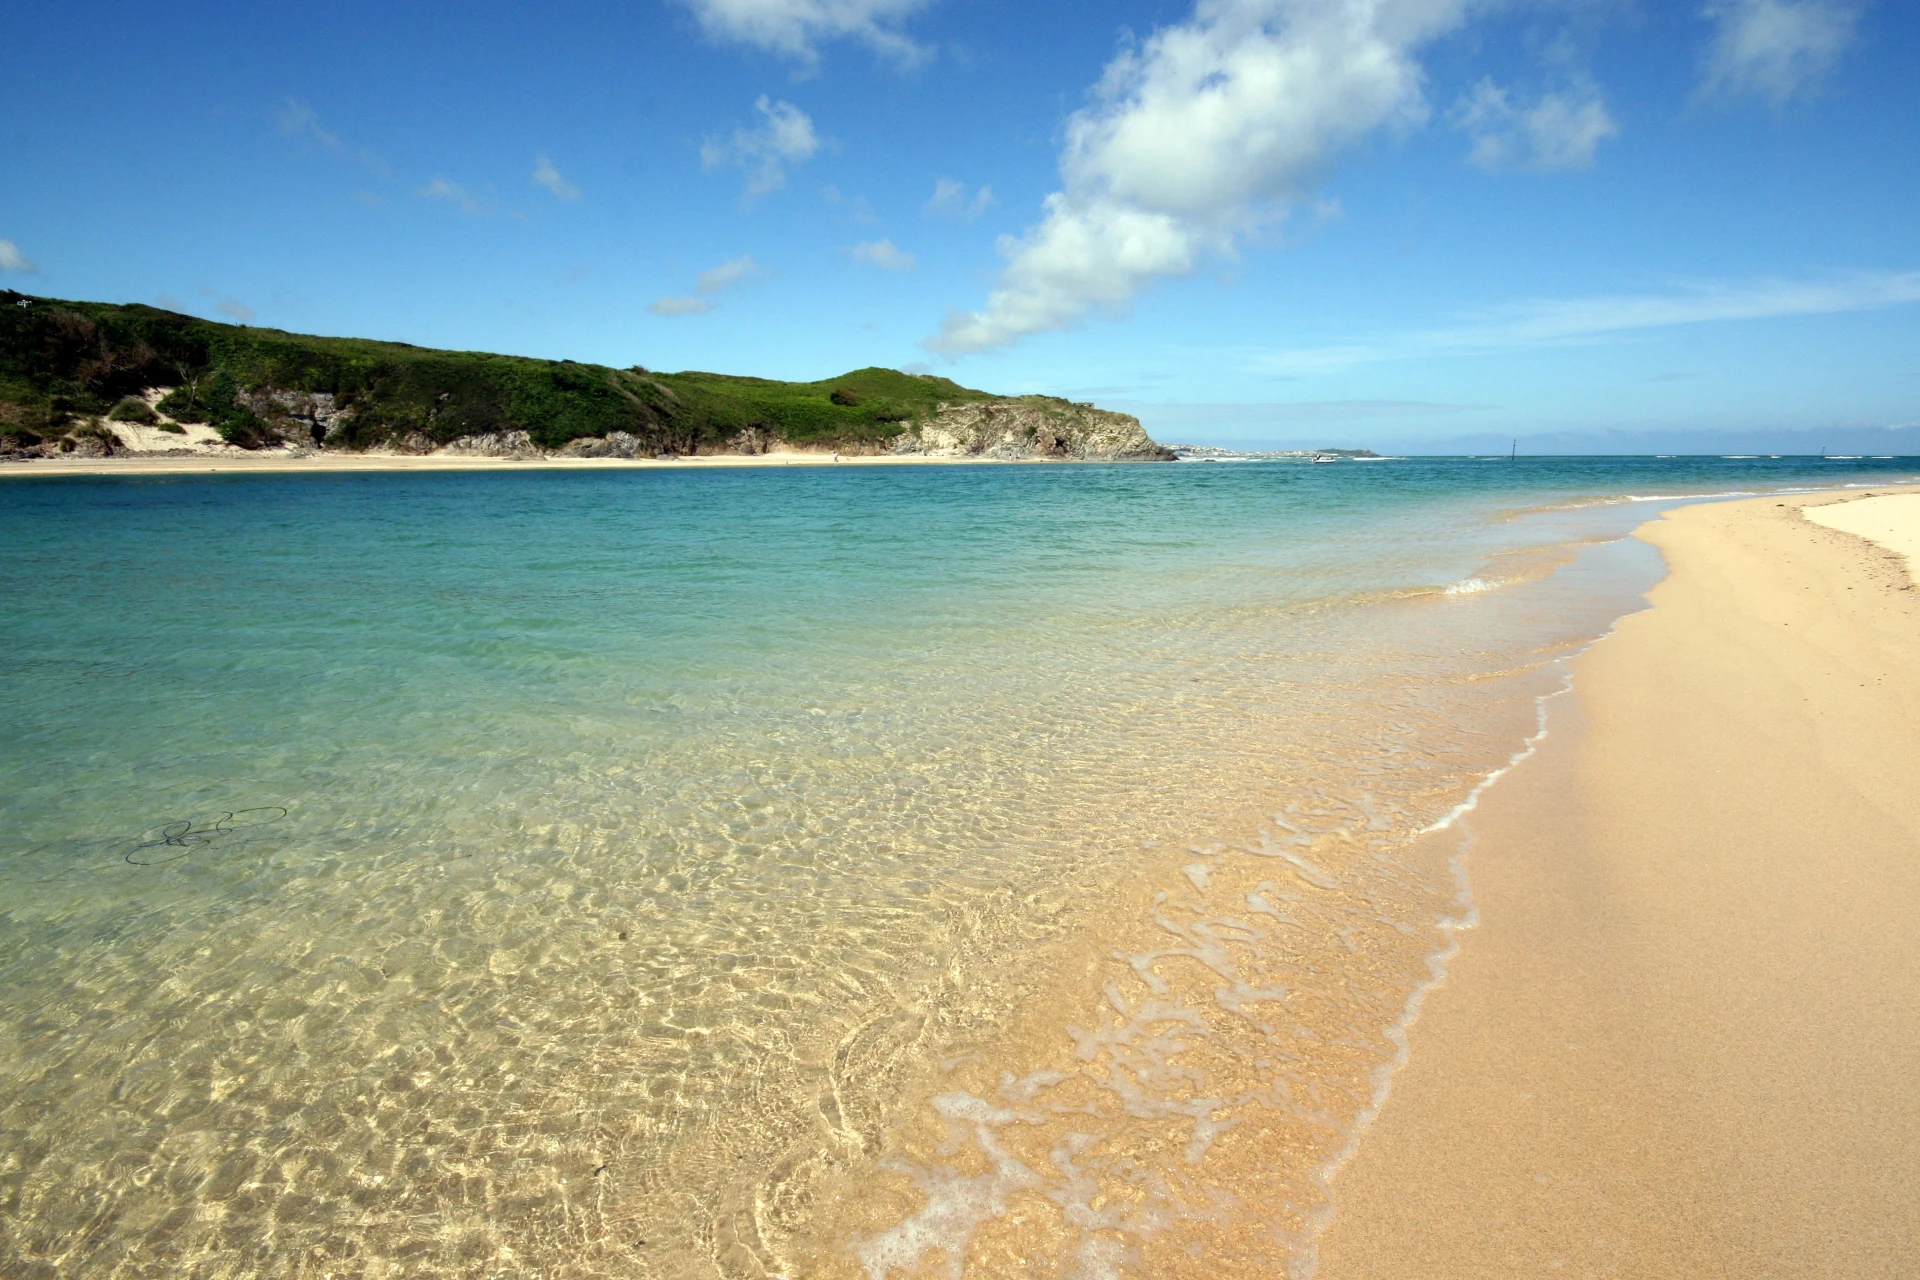 The lovely clear waters of Hayle Beach